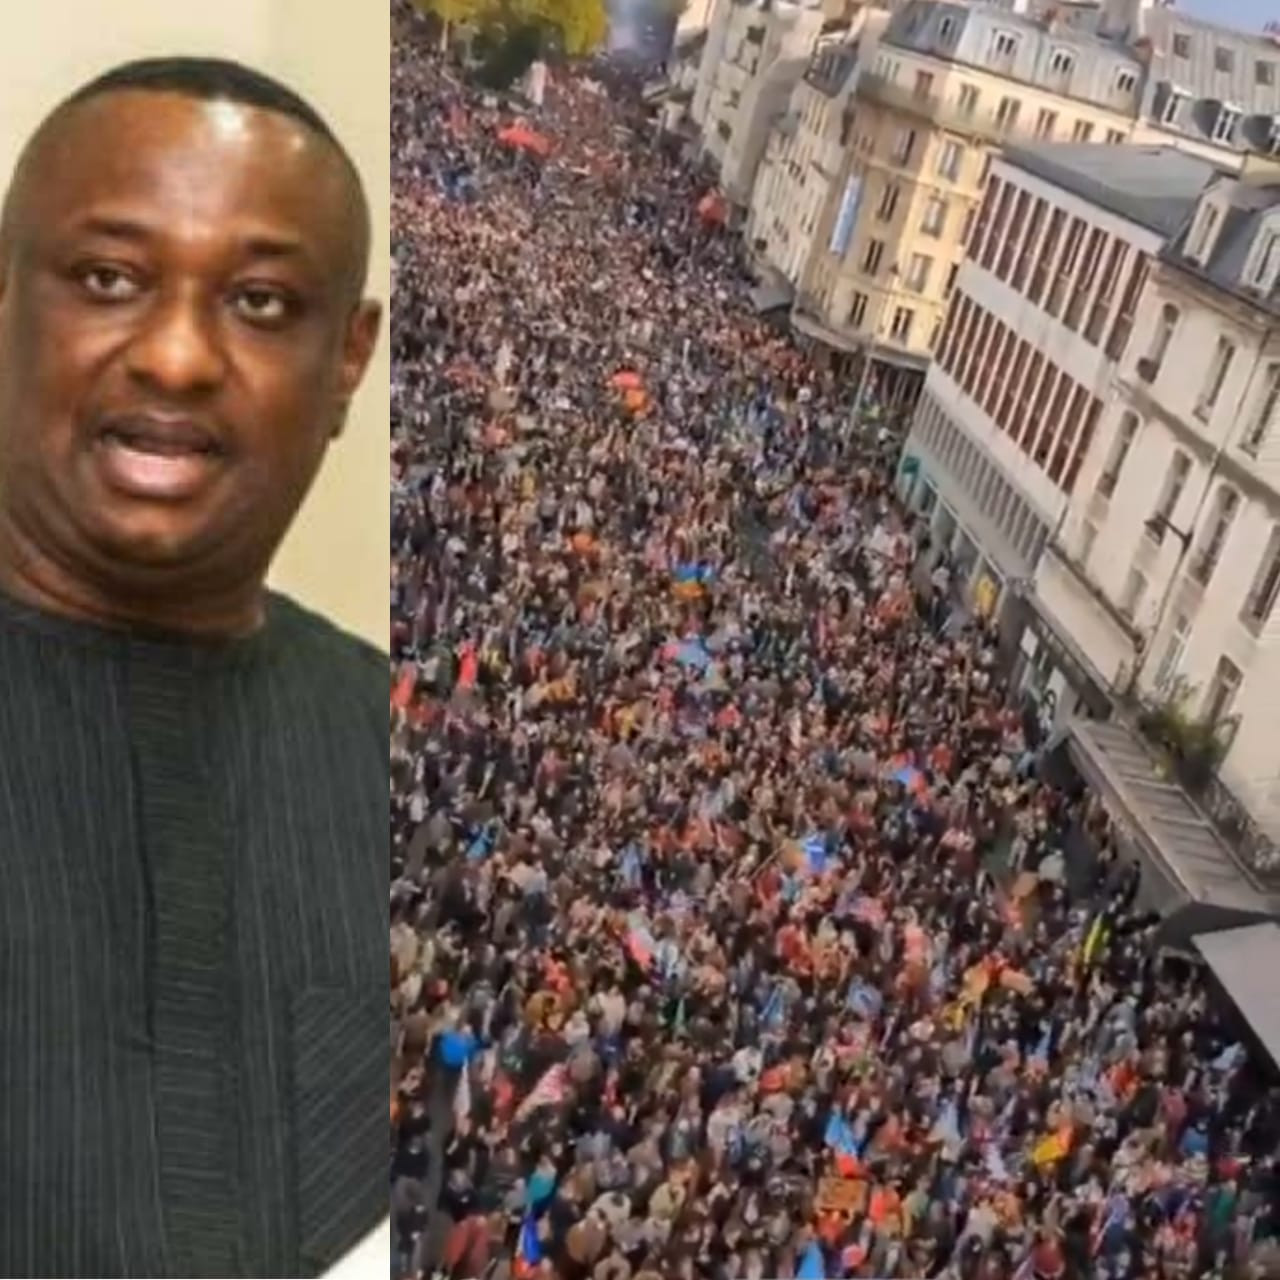 Festus Keyamo says Nigeria is not the only country suffering due to global issues